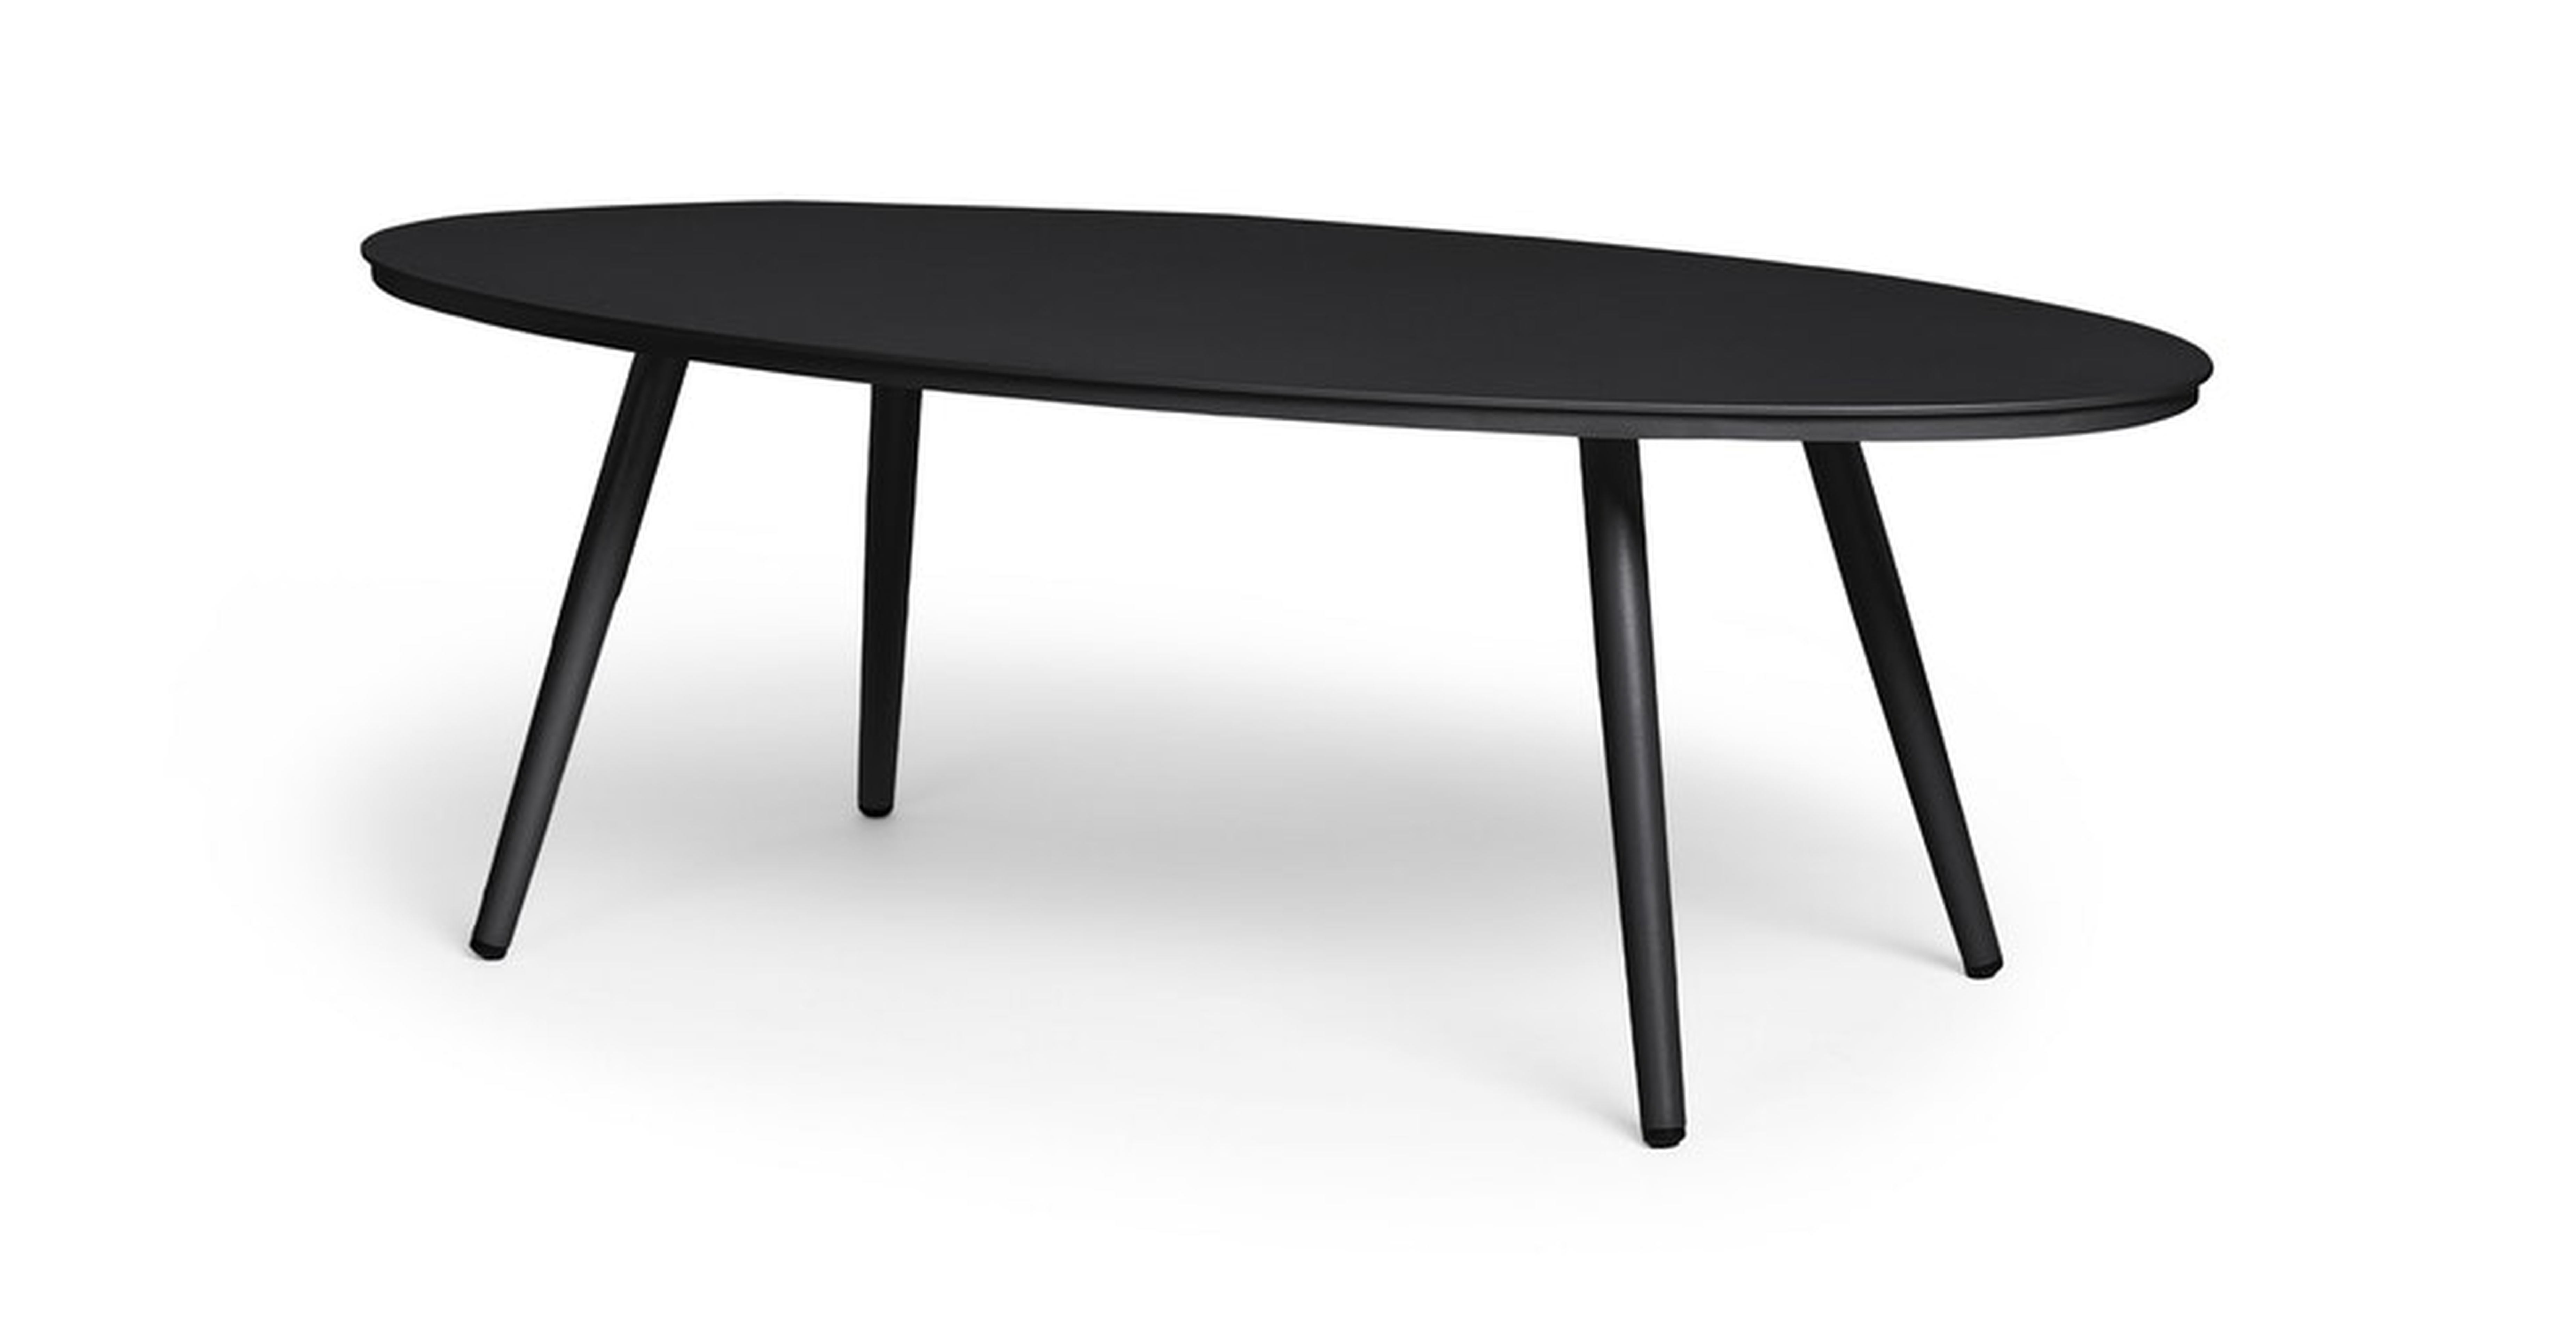 Halden Dark Charcoal Oval Coffee Table - Article